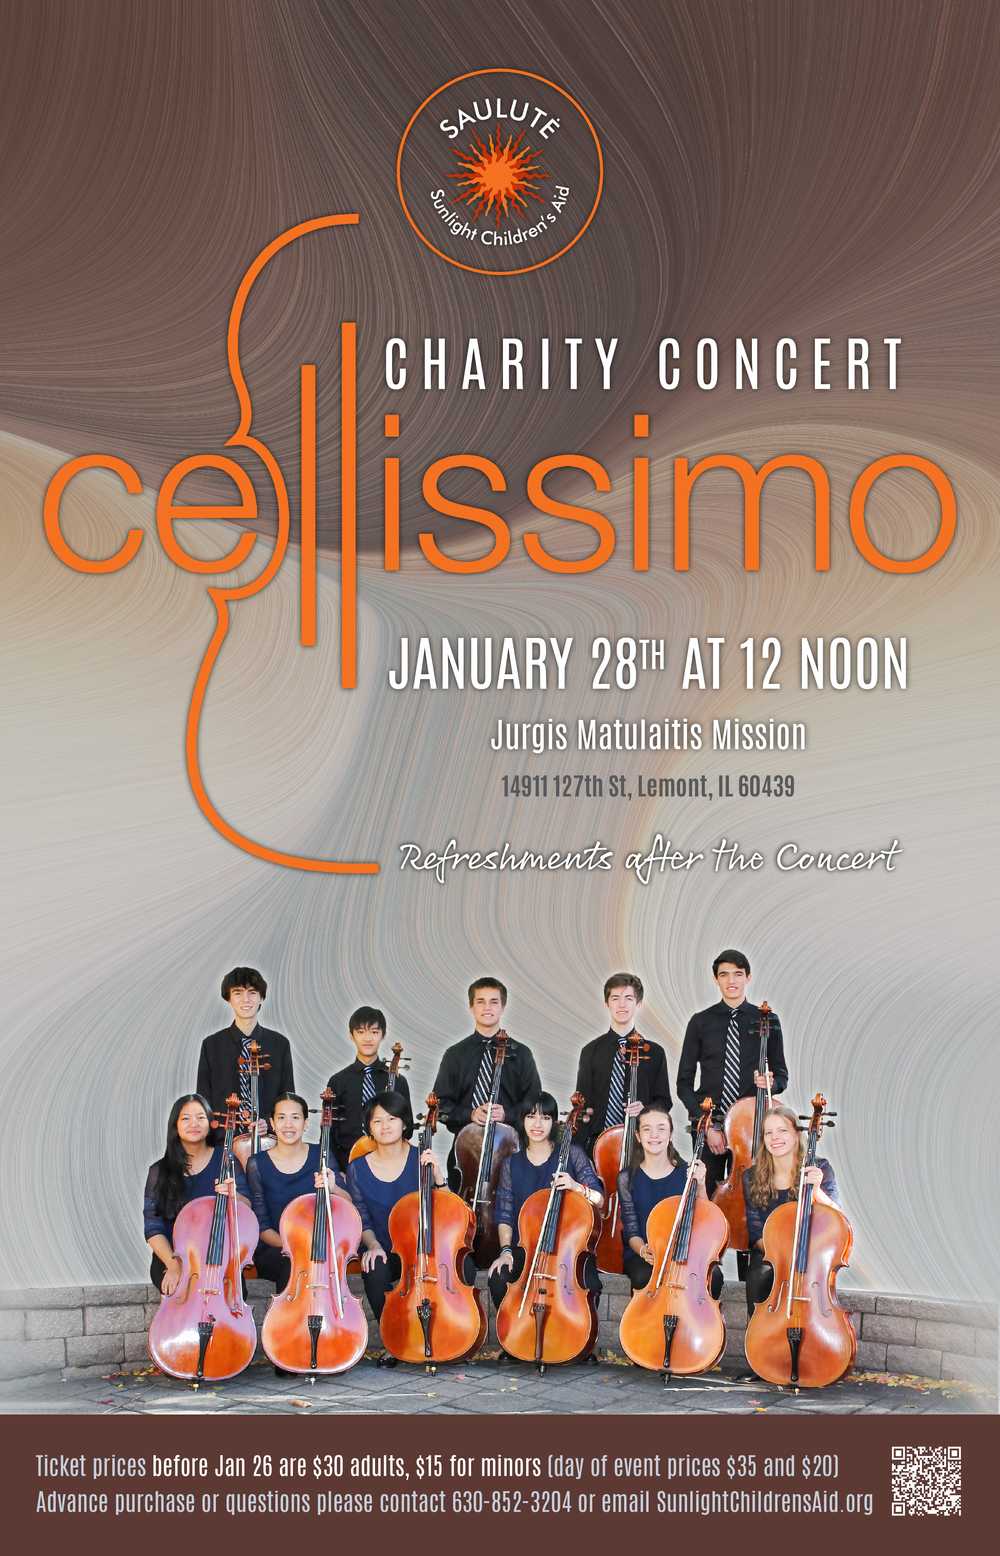 Cello concert to raise funds for Sunlight Children's Aid projects